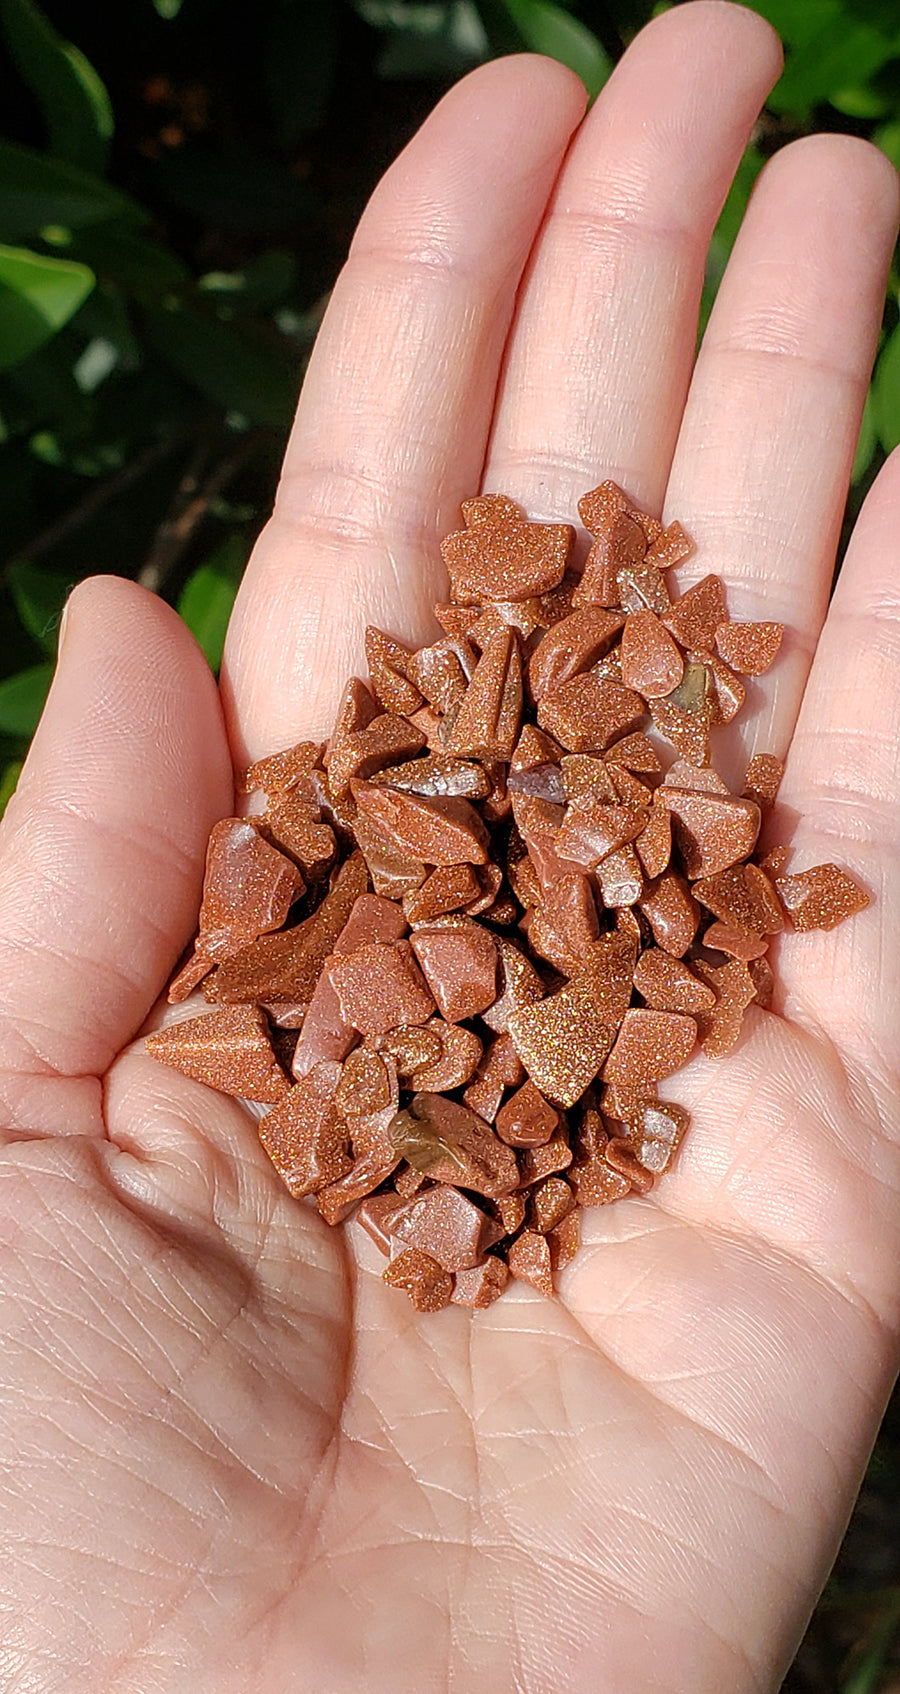 Red Goldstone Gemstone Chips - 1 Ounce Bag